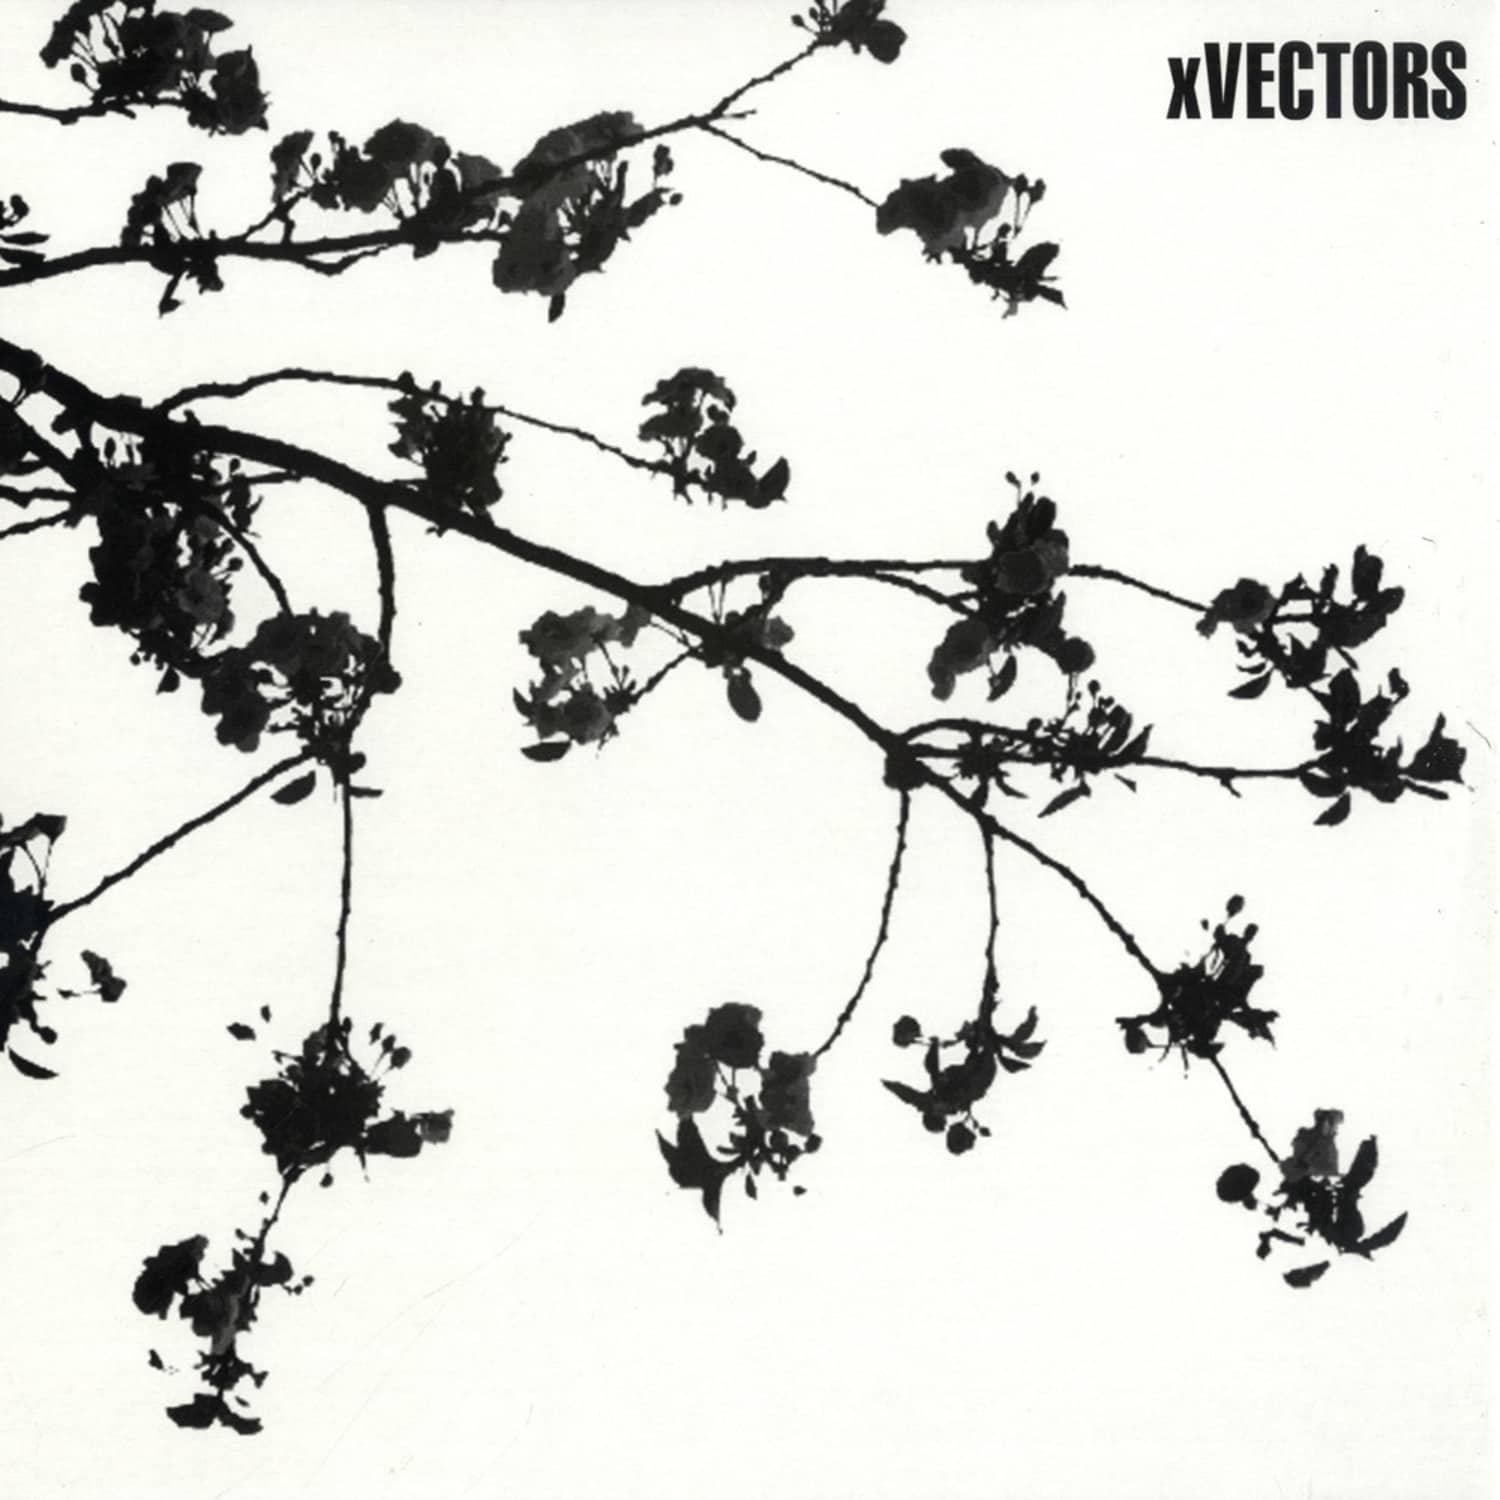 Xvectors - NOW IS THE WINTER OF OUR DISCOTHEQUE